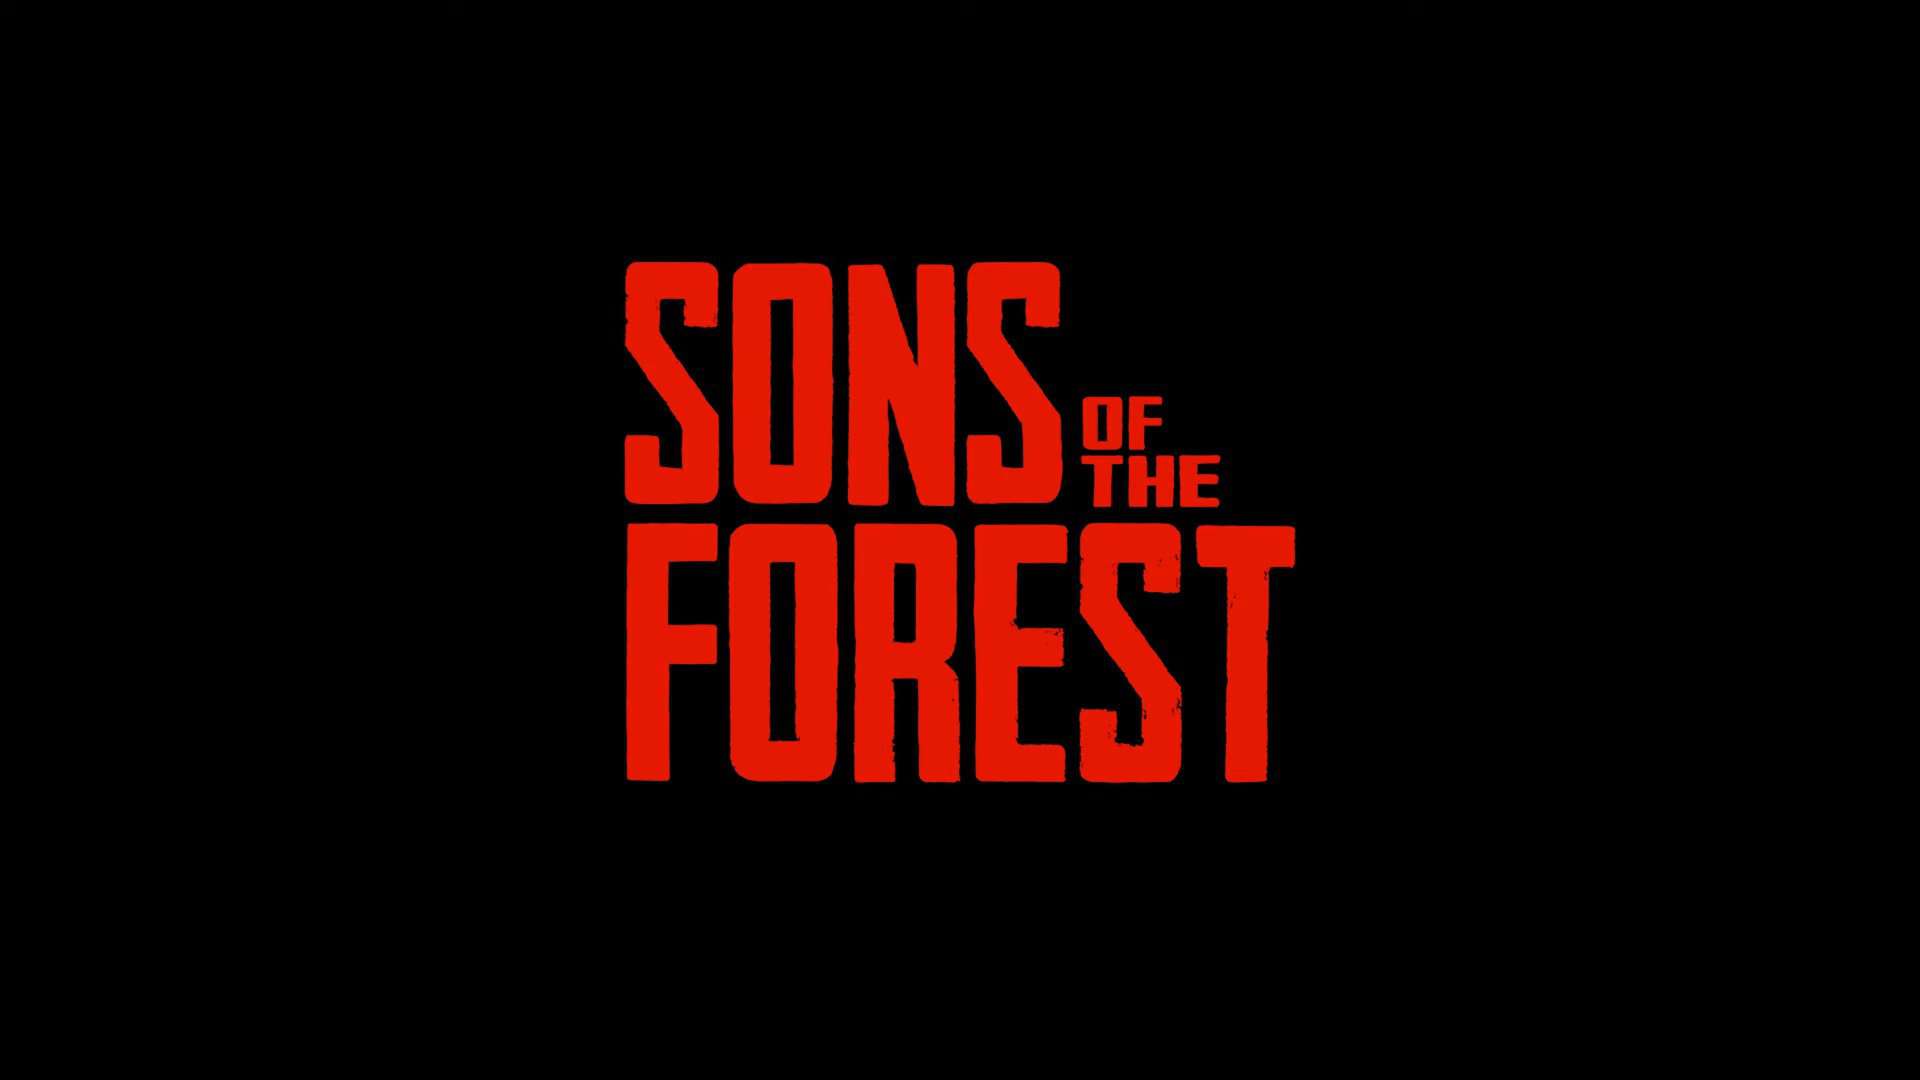 Sons of the Forest update 01: full patch notes - Video Games on